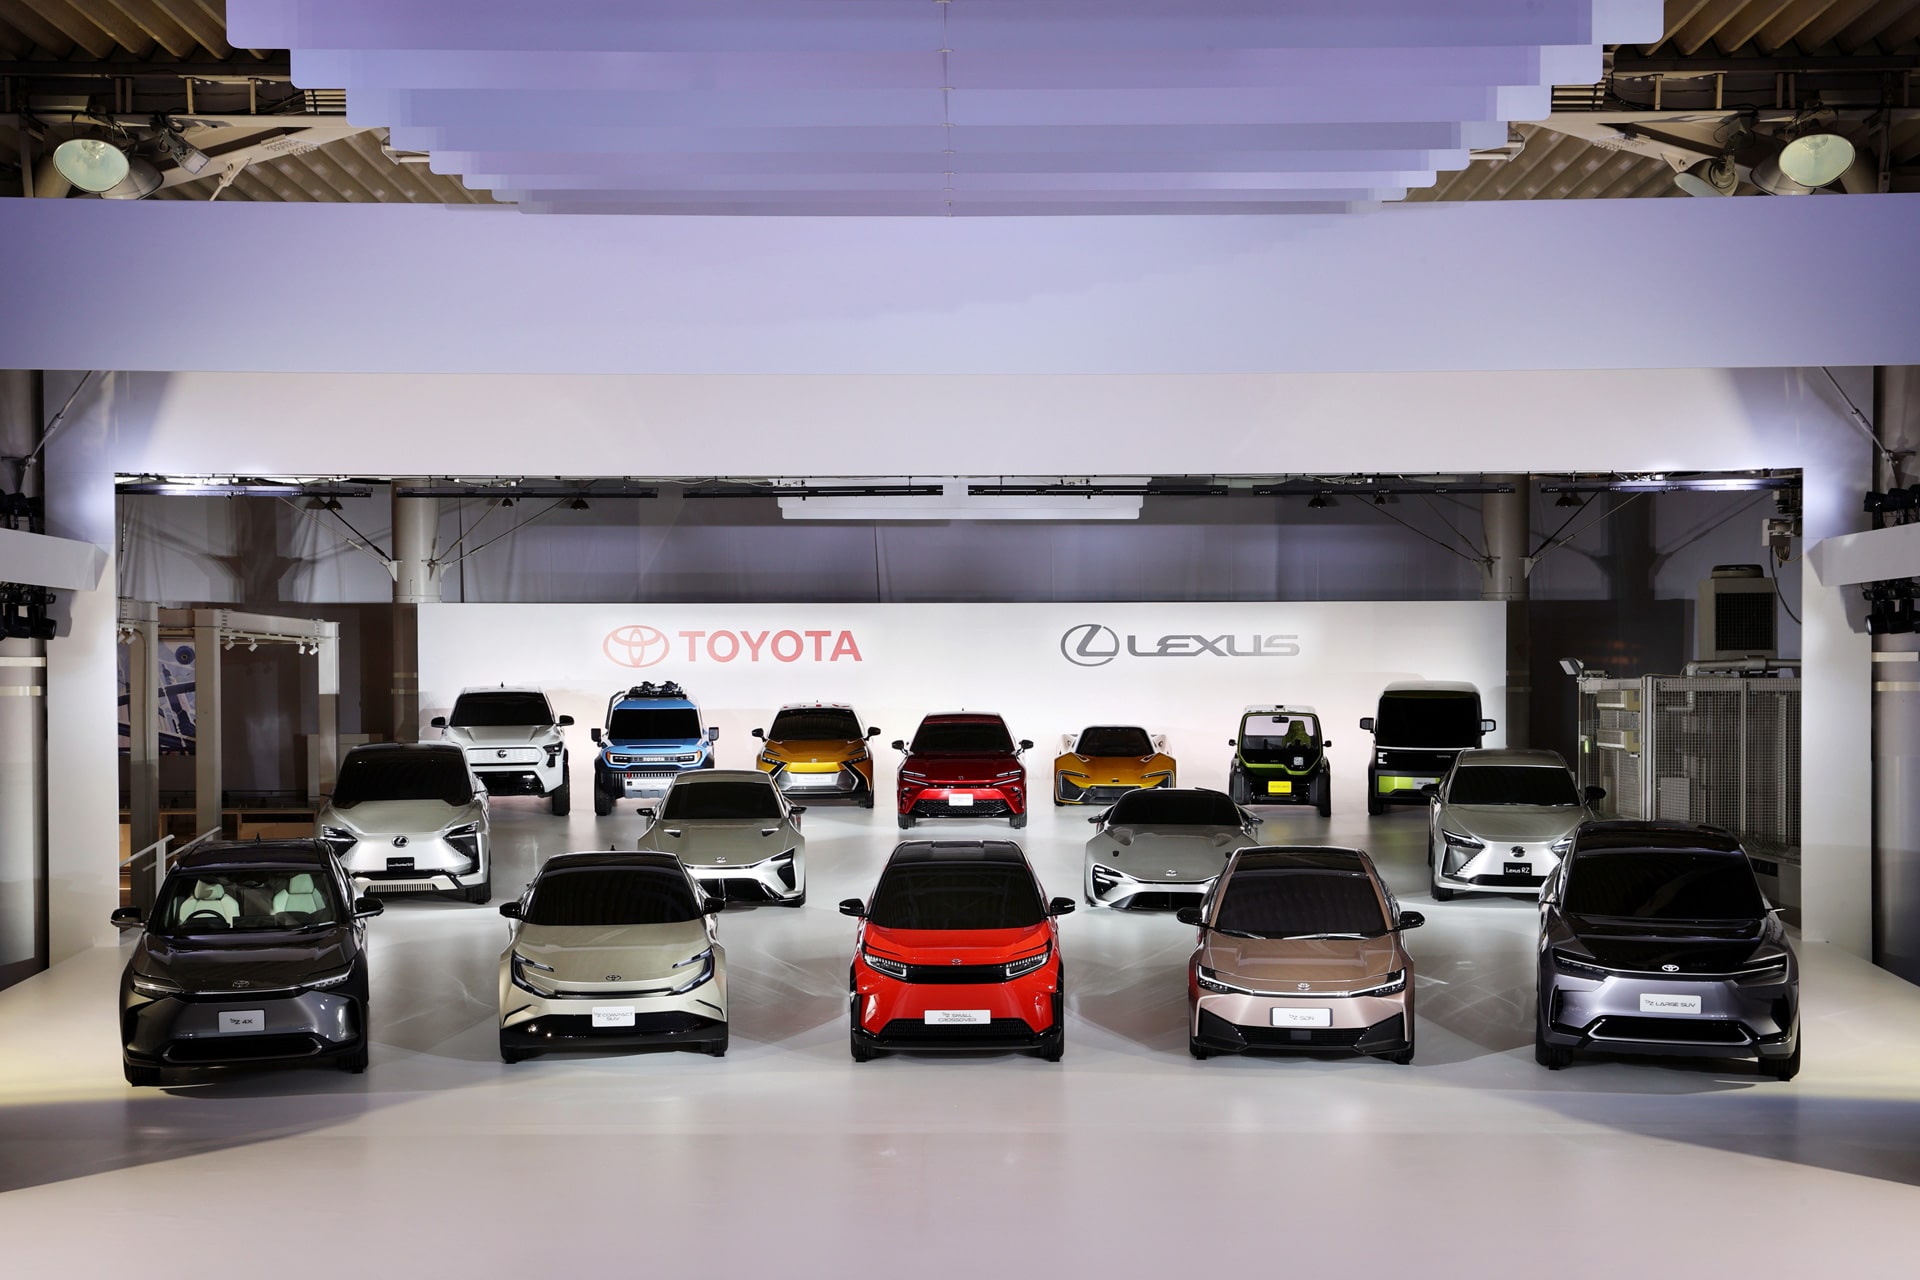 Toyota Reveals Full Lineup of Battery EVs: Toyota’s Briefing on BEV Strategies